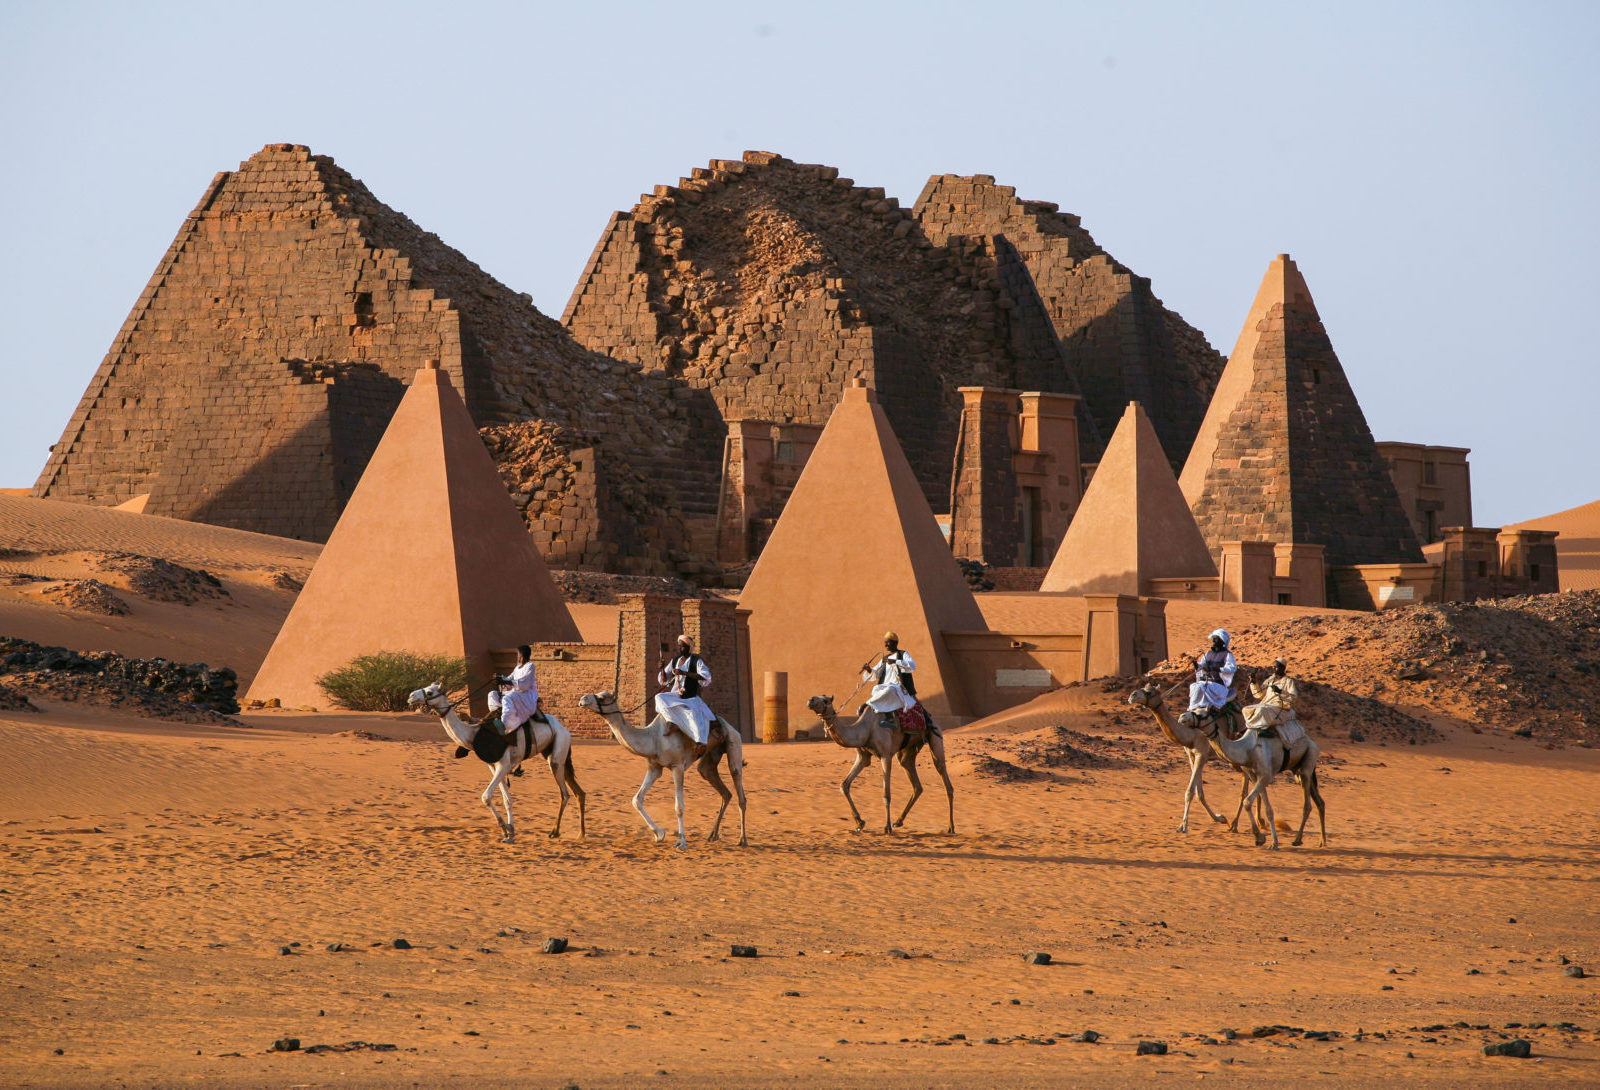 Can You Conquer All 7 Continents in This 30-Question Quiz? Pyramids of Meroe, Nubian pyramids, Sudan